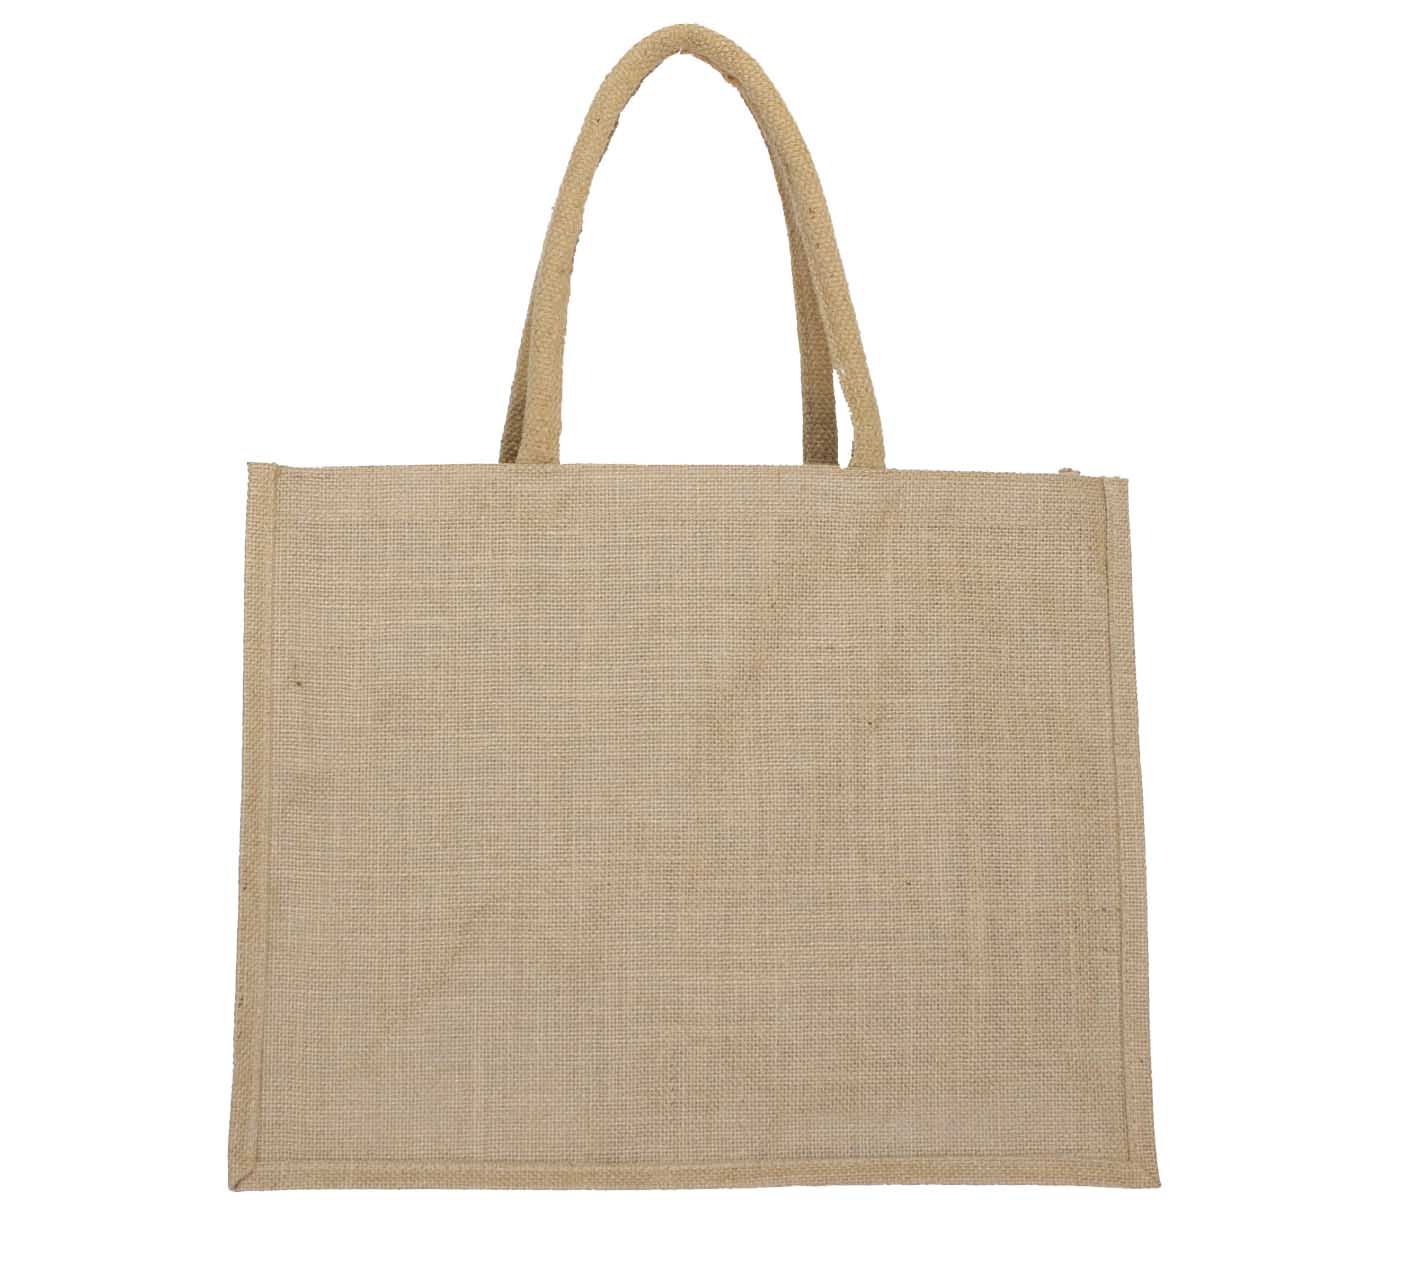 Promotional Collection | Custom Jute & Cotton Bags | Simply Jute ...